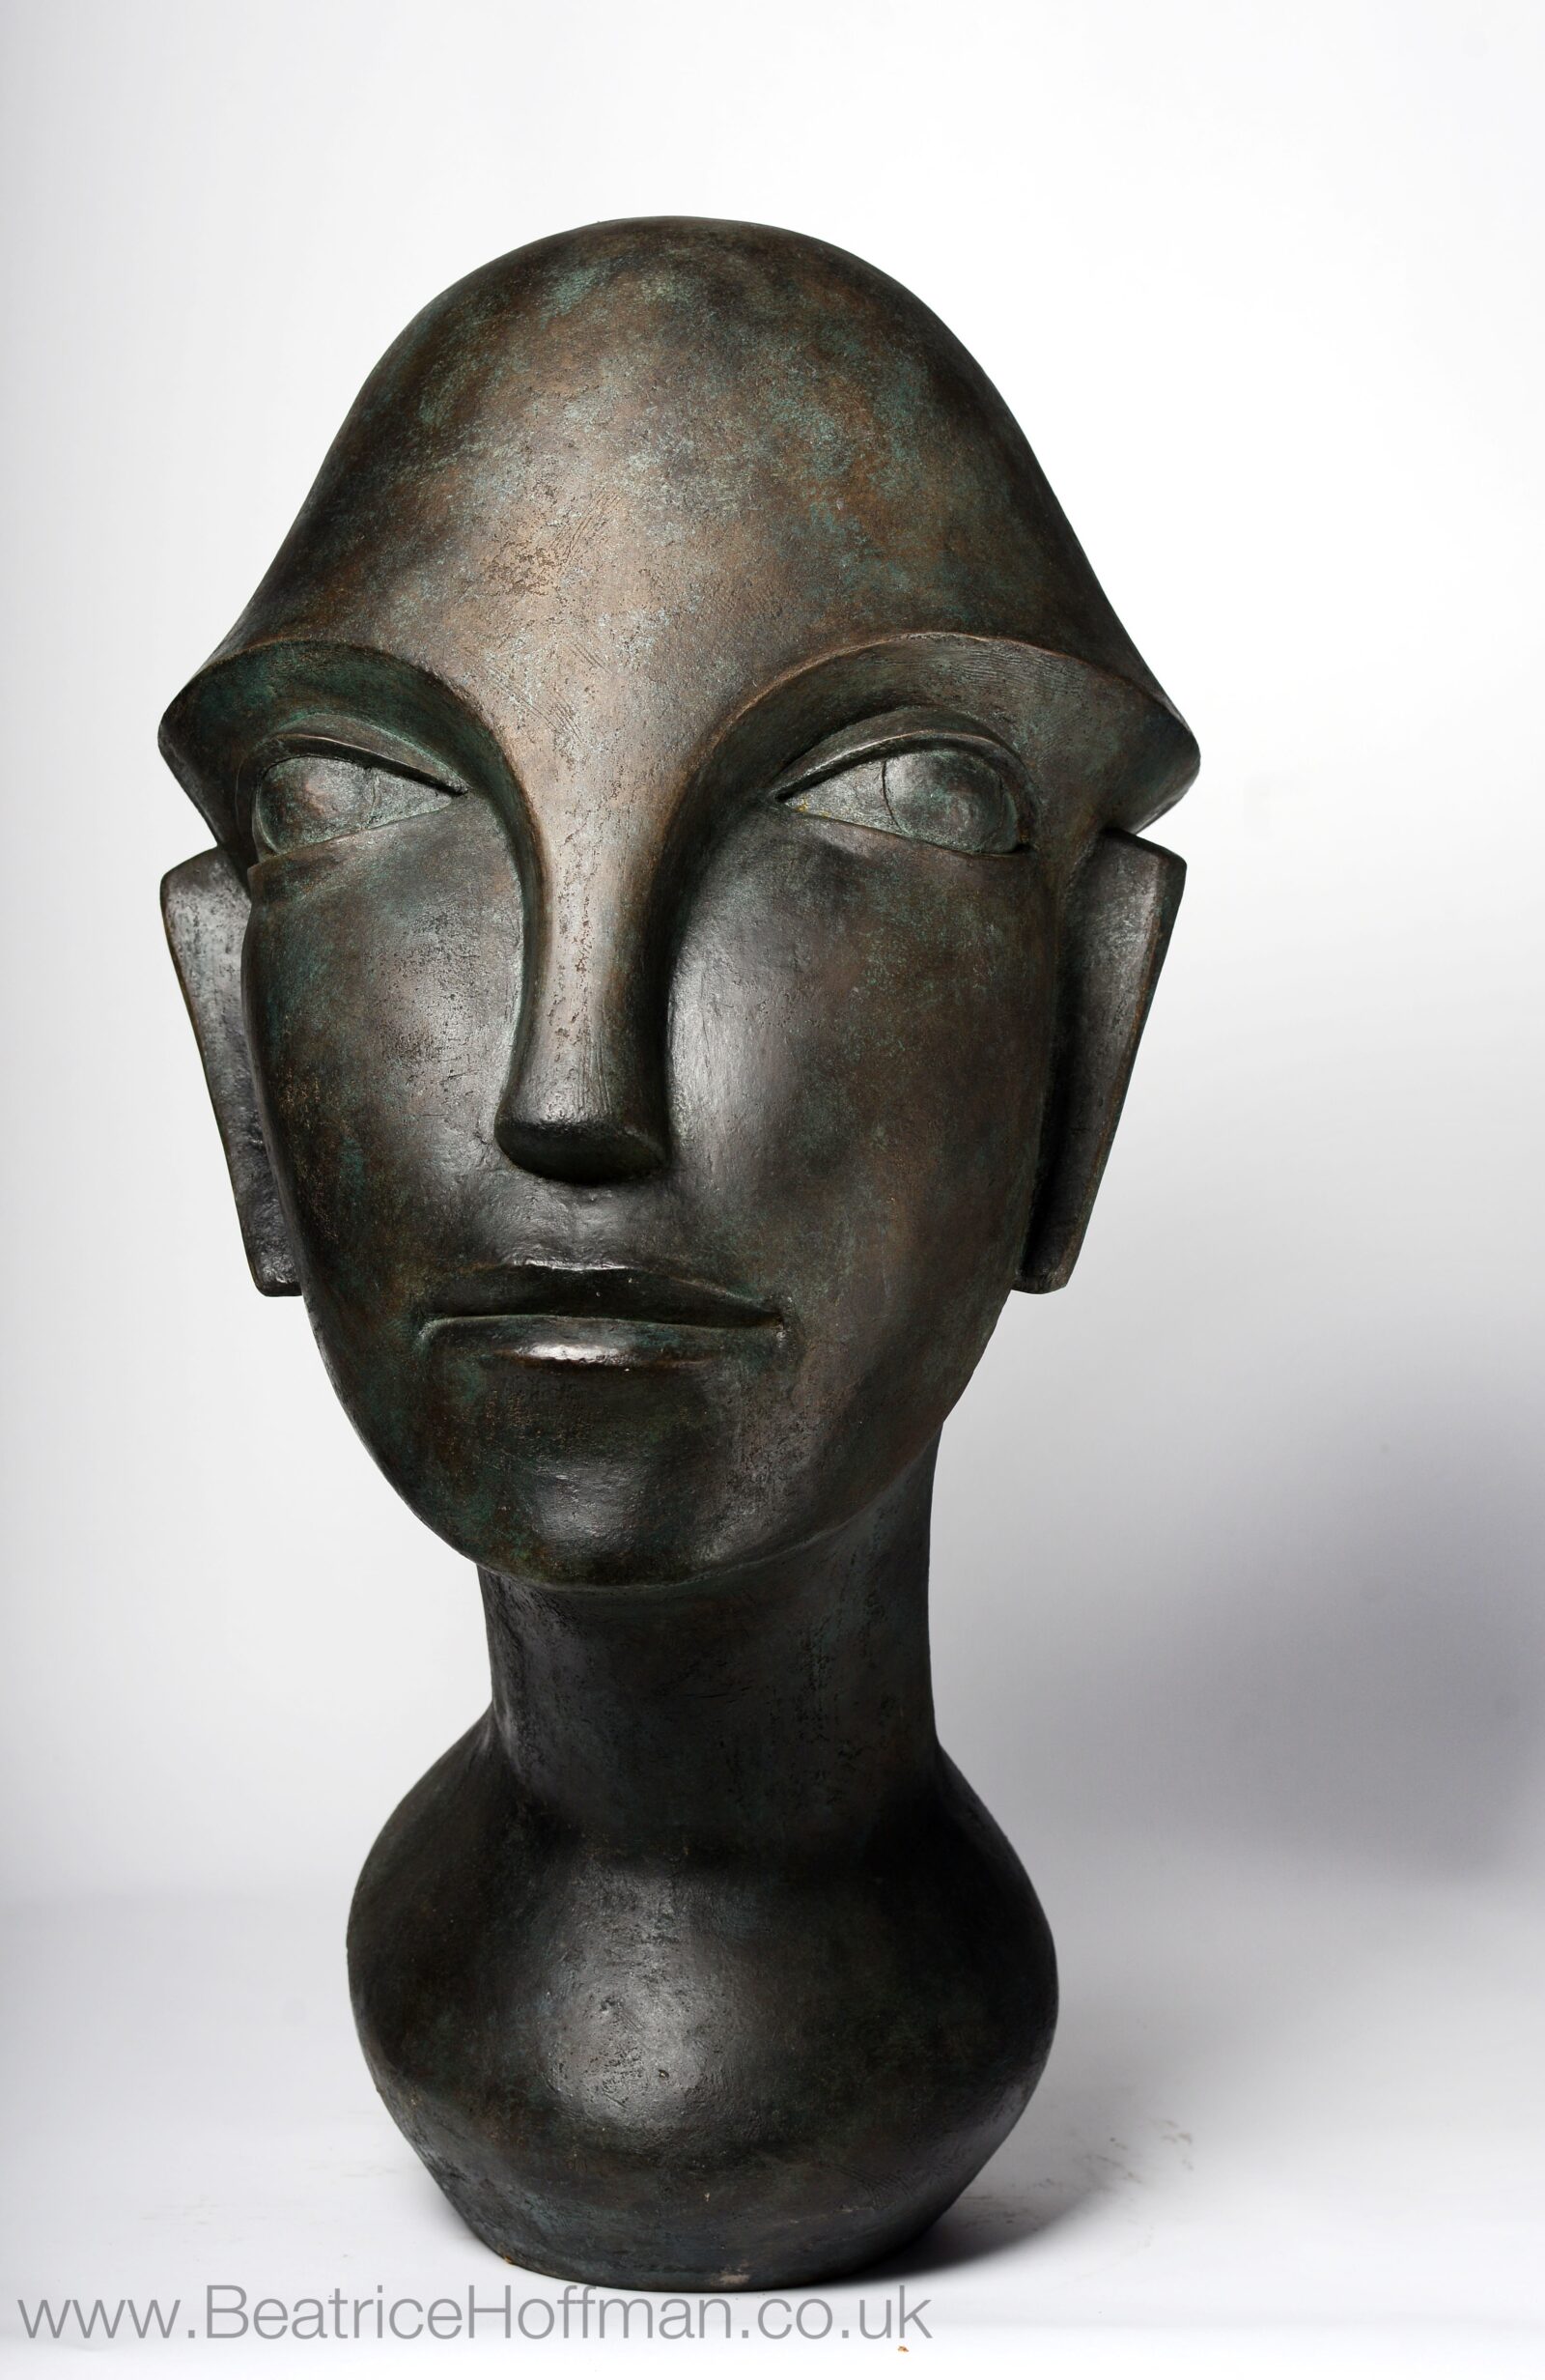 Overlarge abstract sculpture of a modern cubist head suitable as a focal point for the garden and home